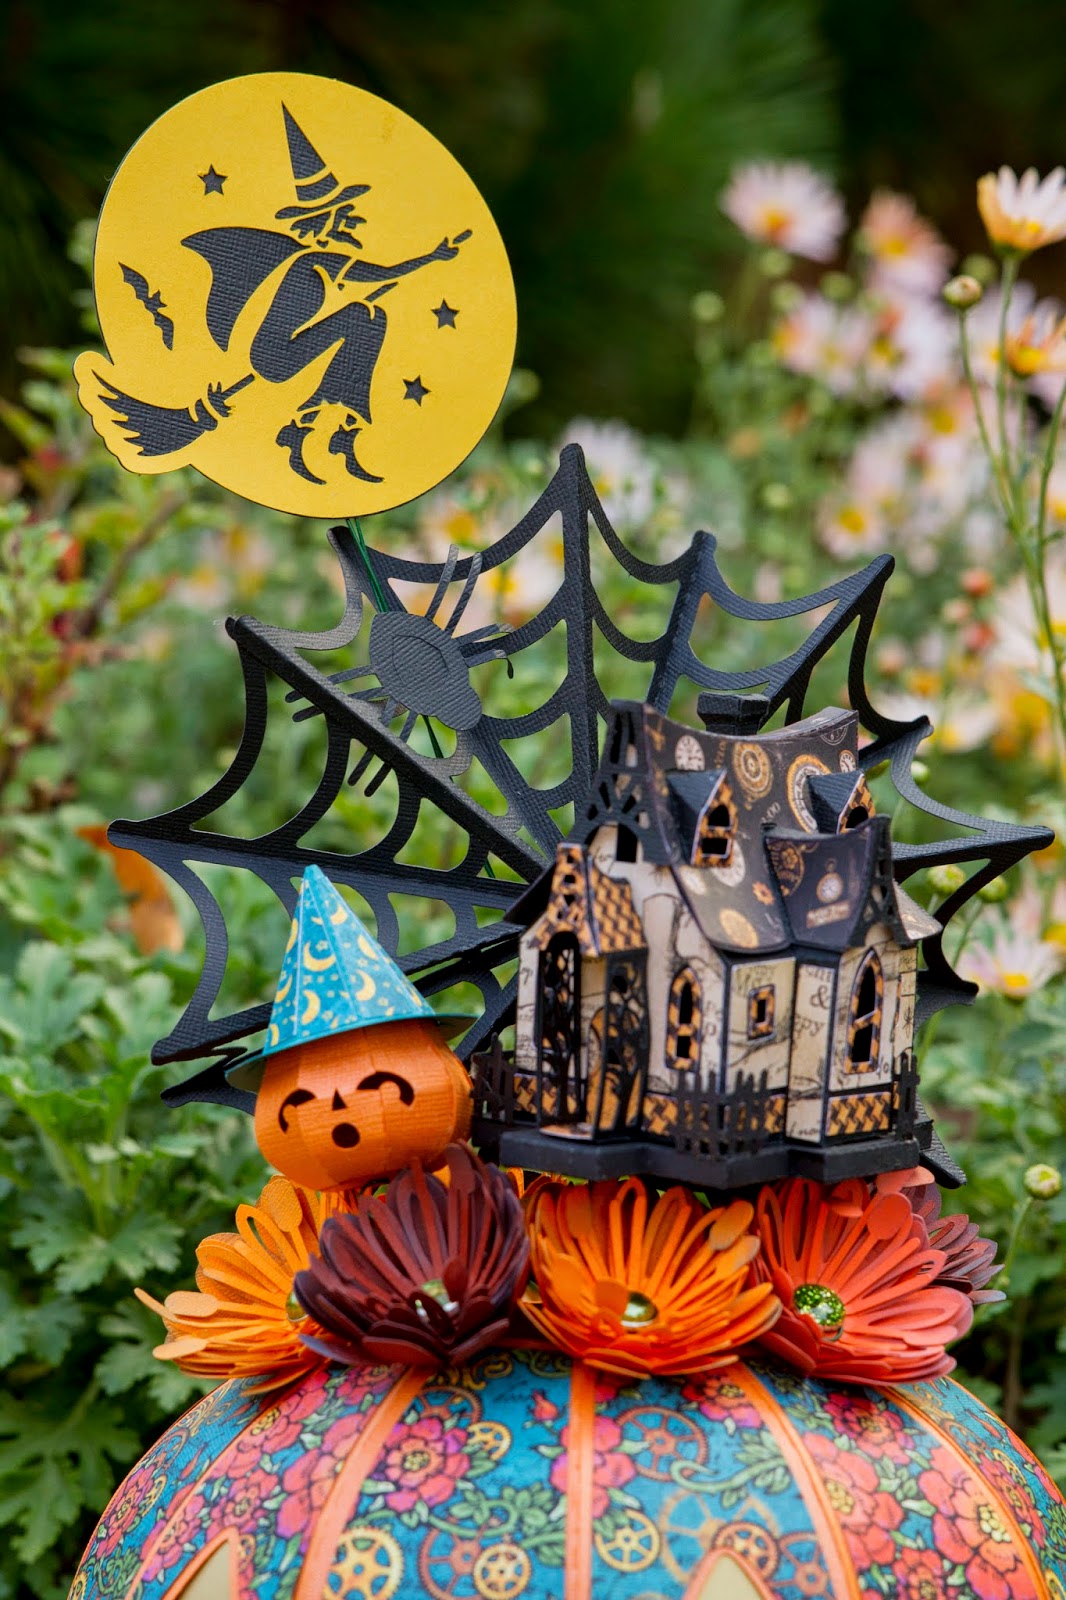 Close up of top of pumpkin showing scene of a small pumpkin, witch house, spiderweb and flowers